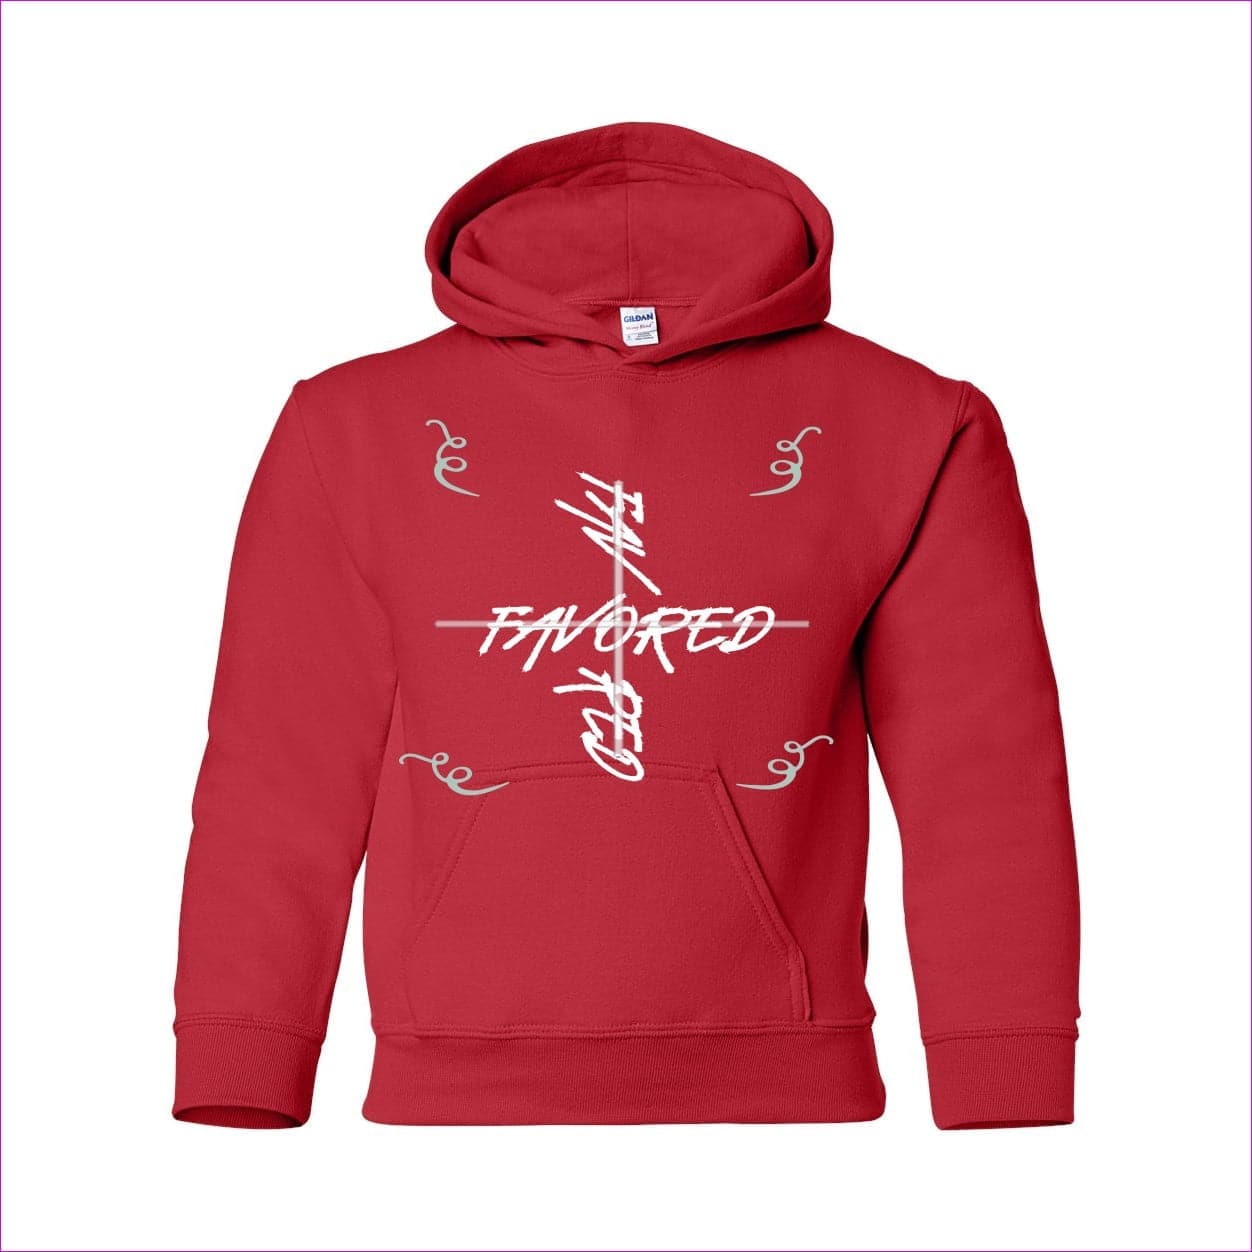 Red Favored 2 Heavy Blend Youth Hooded Sweatshirt - kids hoodies at TFC&H Co.